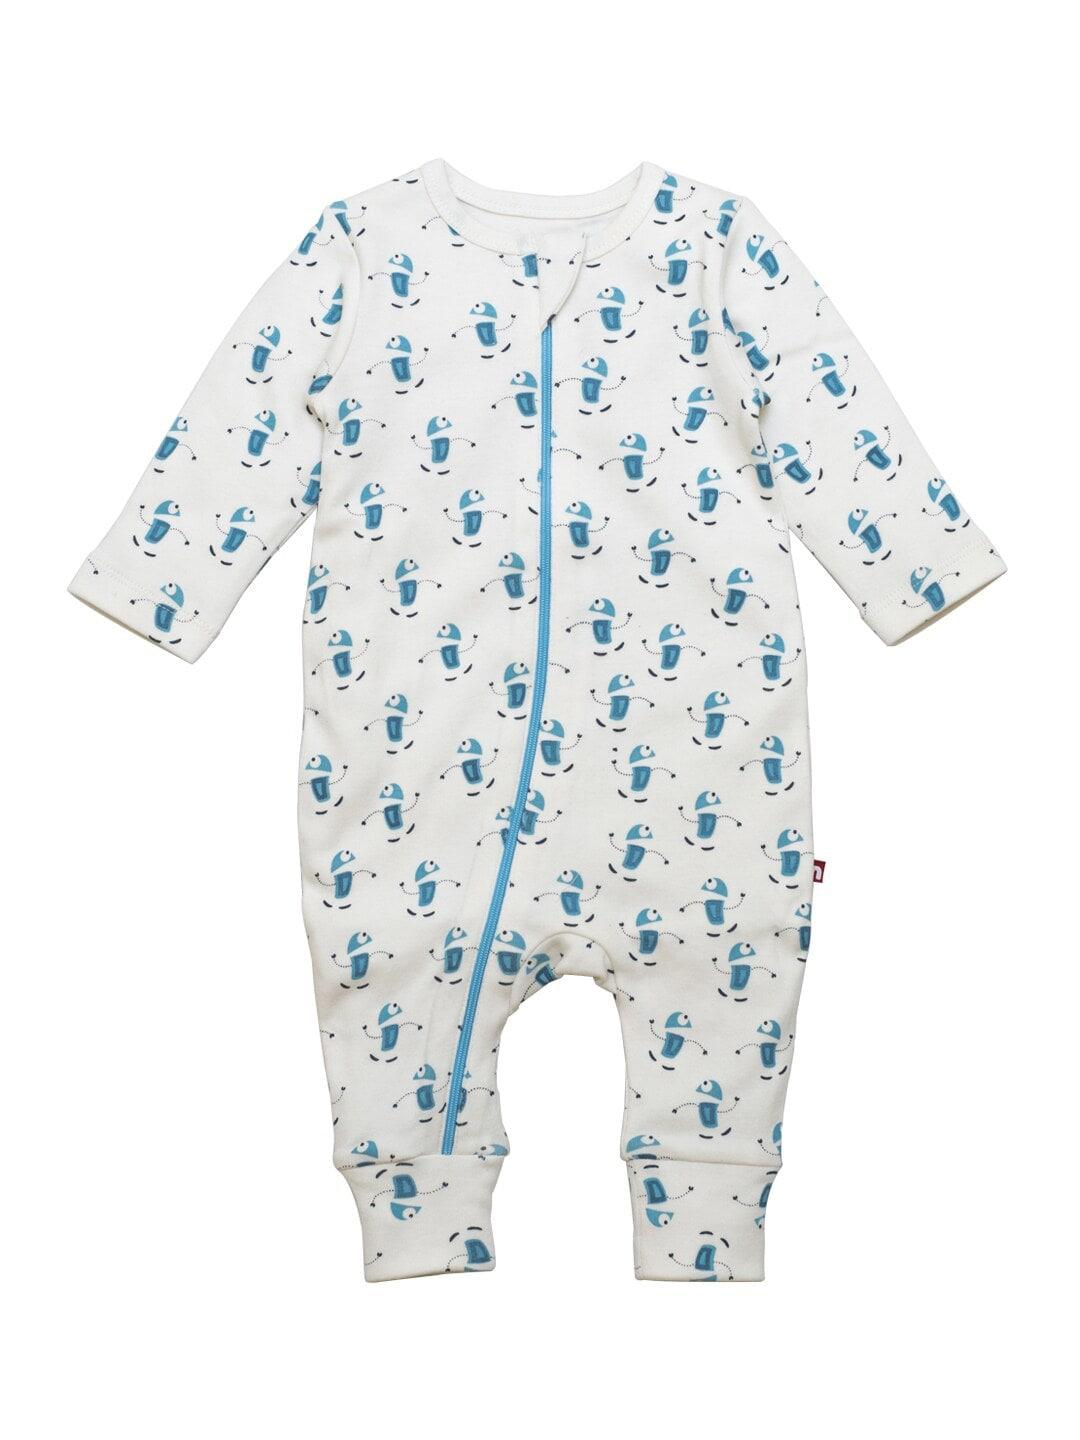 nino bambino infant kids cream-coloured & blue printed  organic cotton sustainable rompers